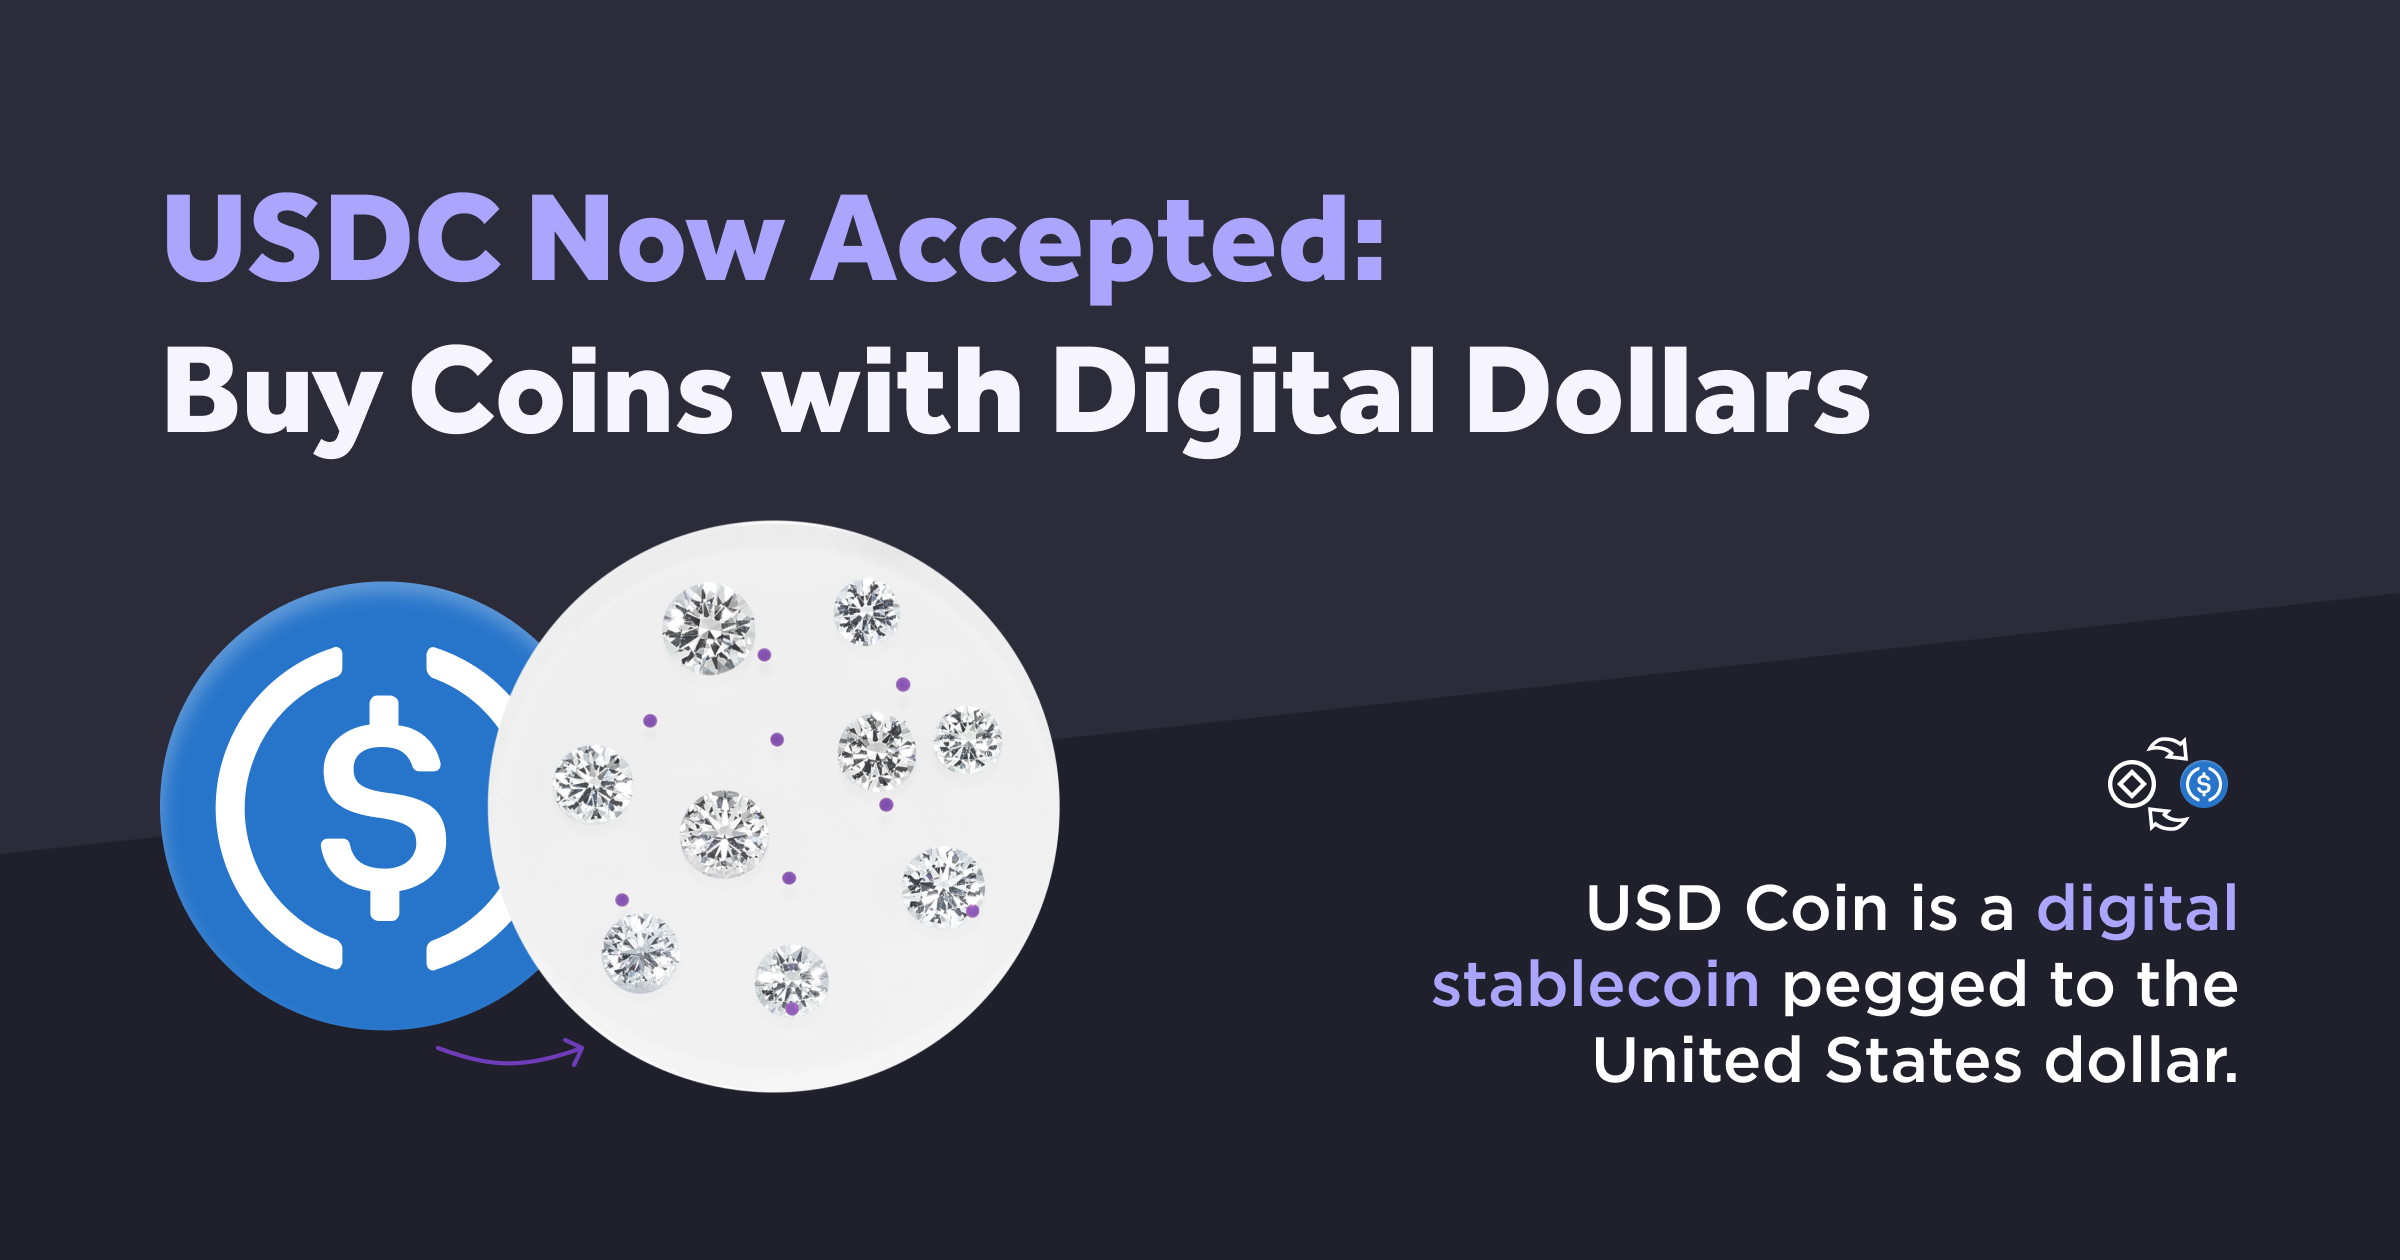 USDC Now Accepted - Buy Coins with Digital Dollars